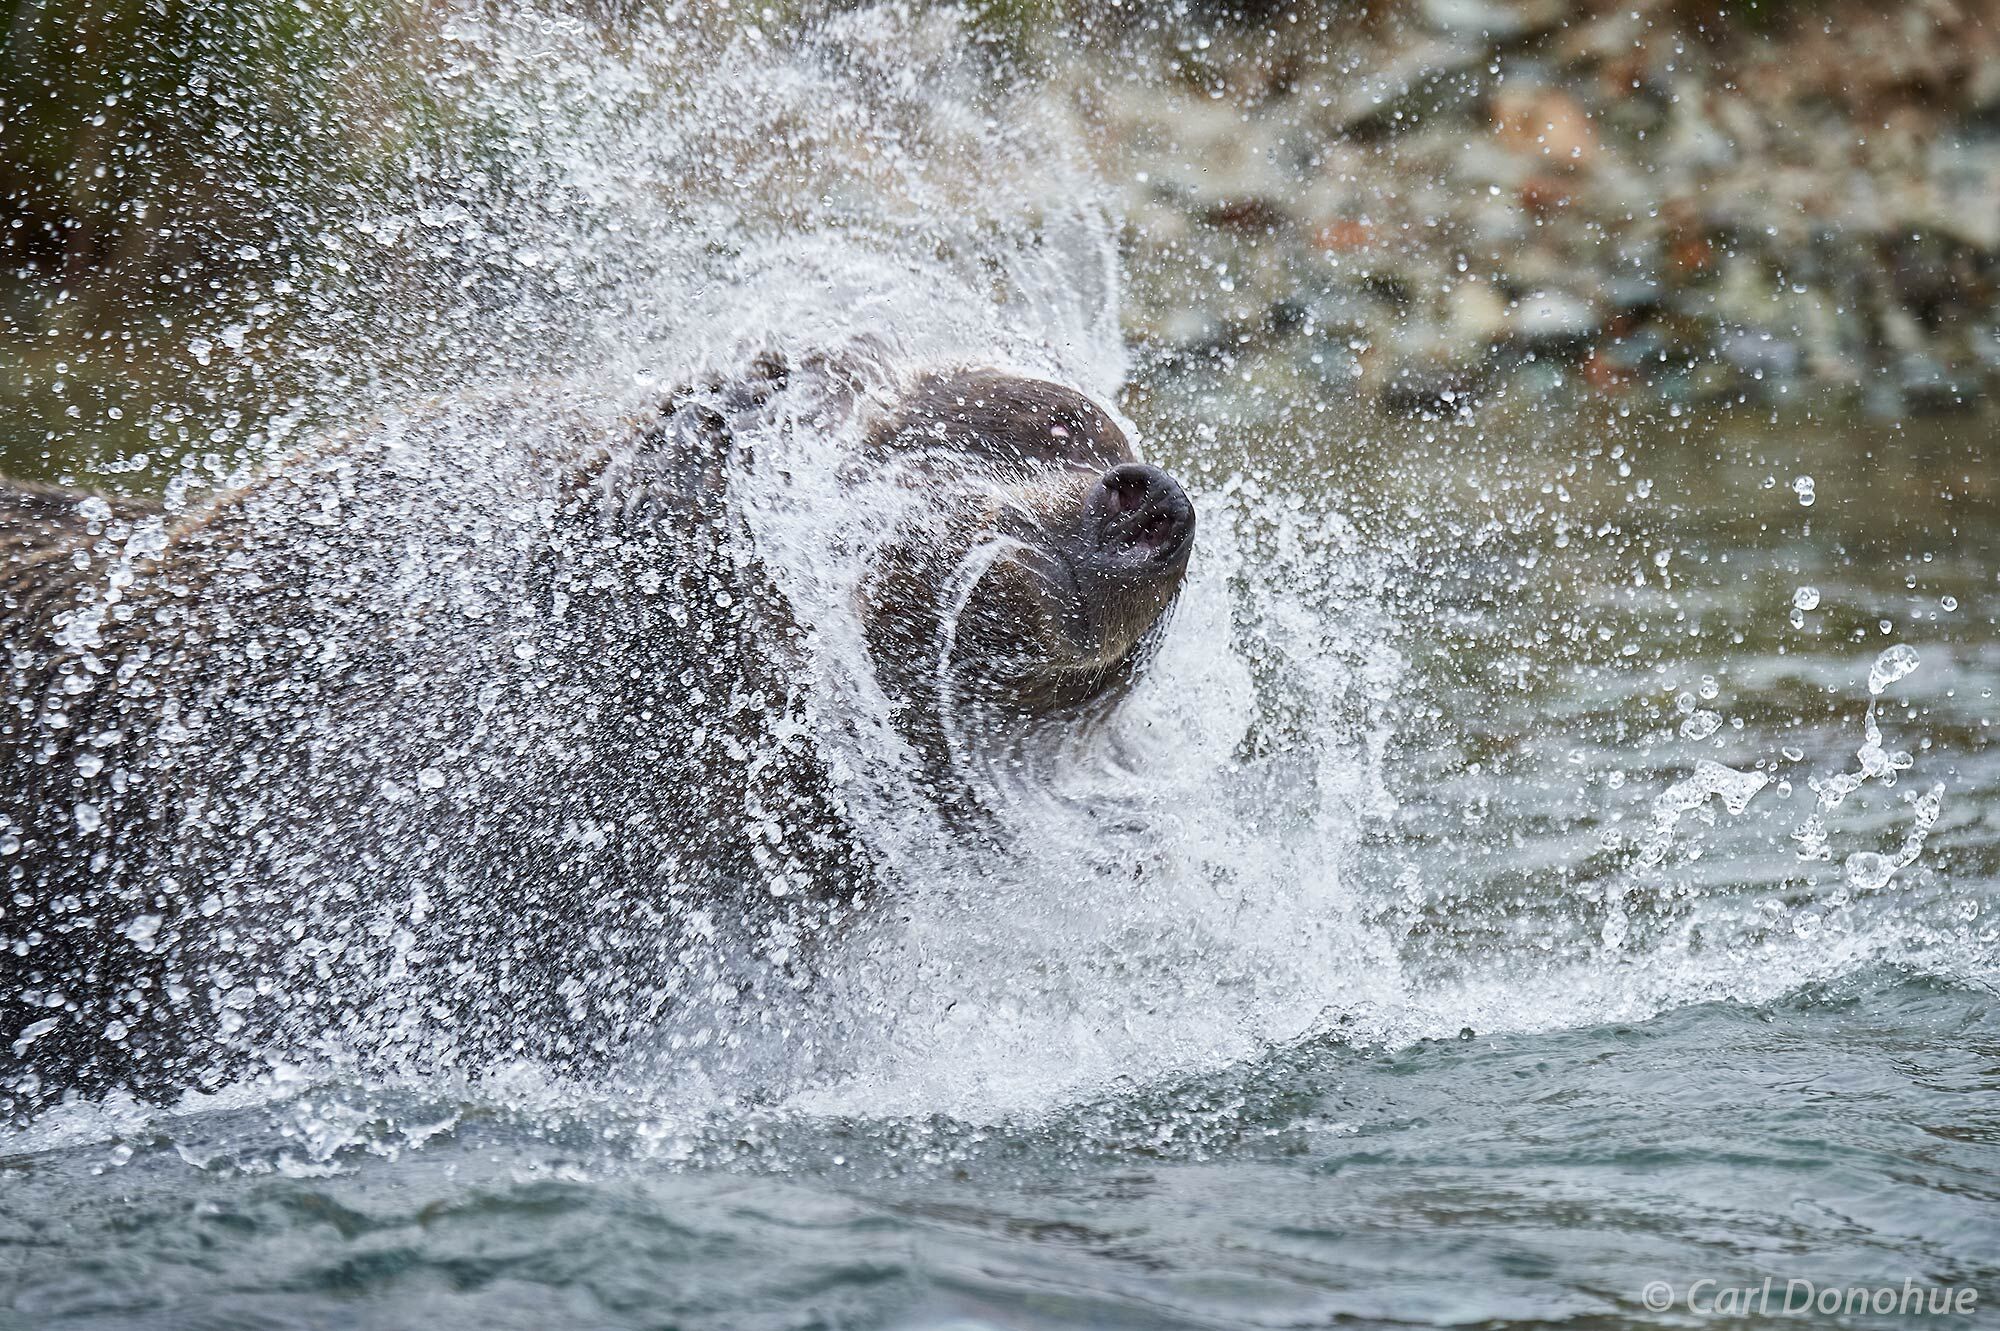 A grizzly bear shaking water from her head as she comes up for air, while chasing salmon in the river. Brown bear, Katmai National...